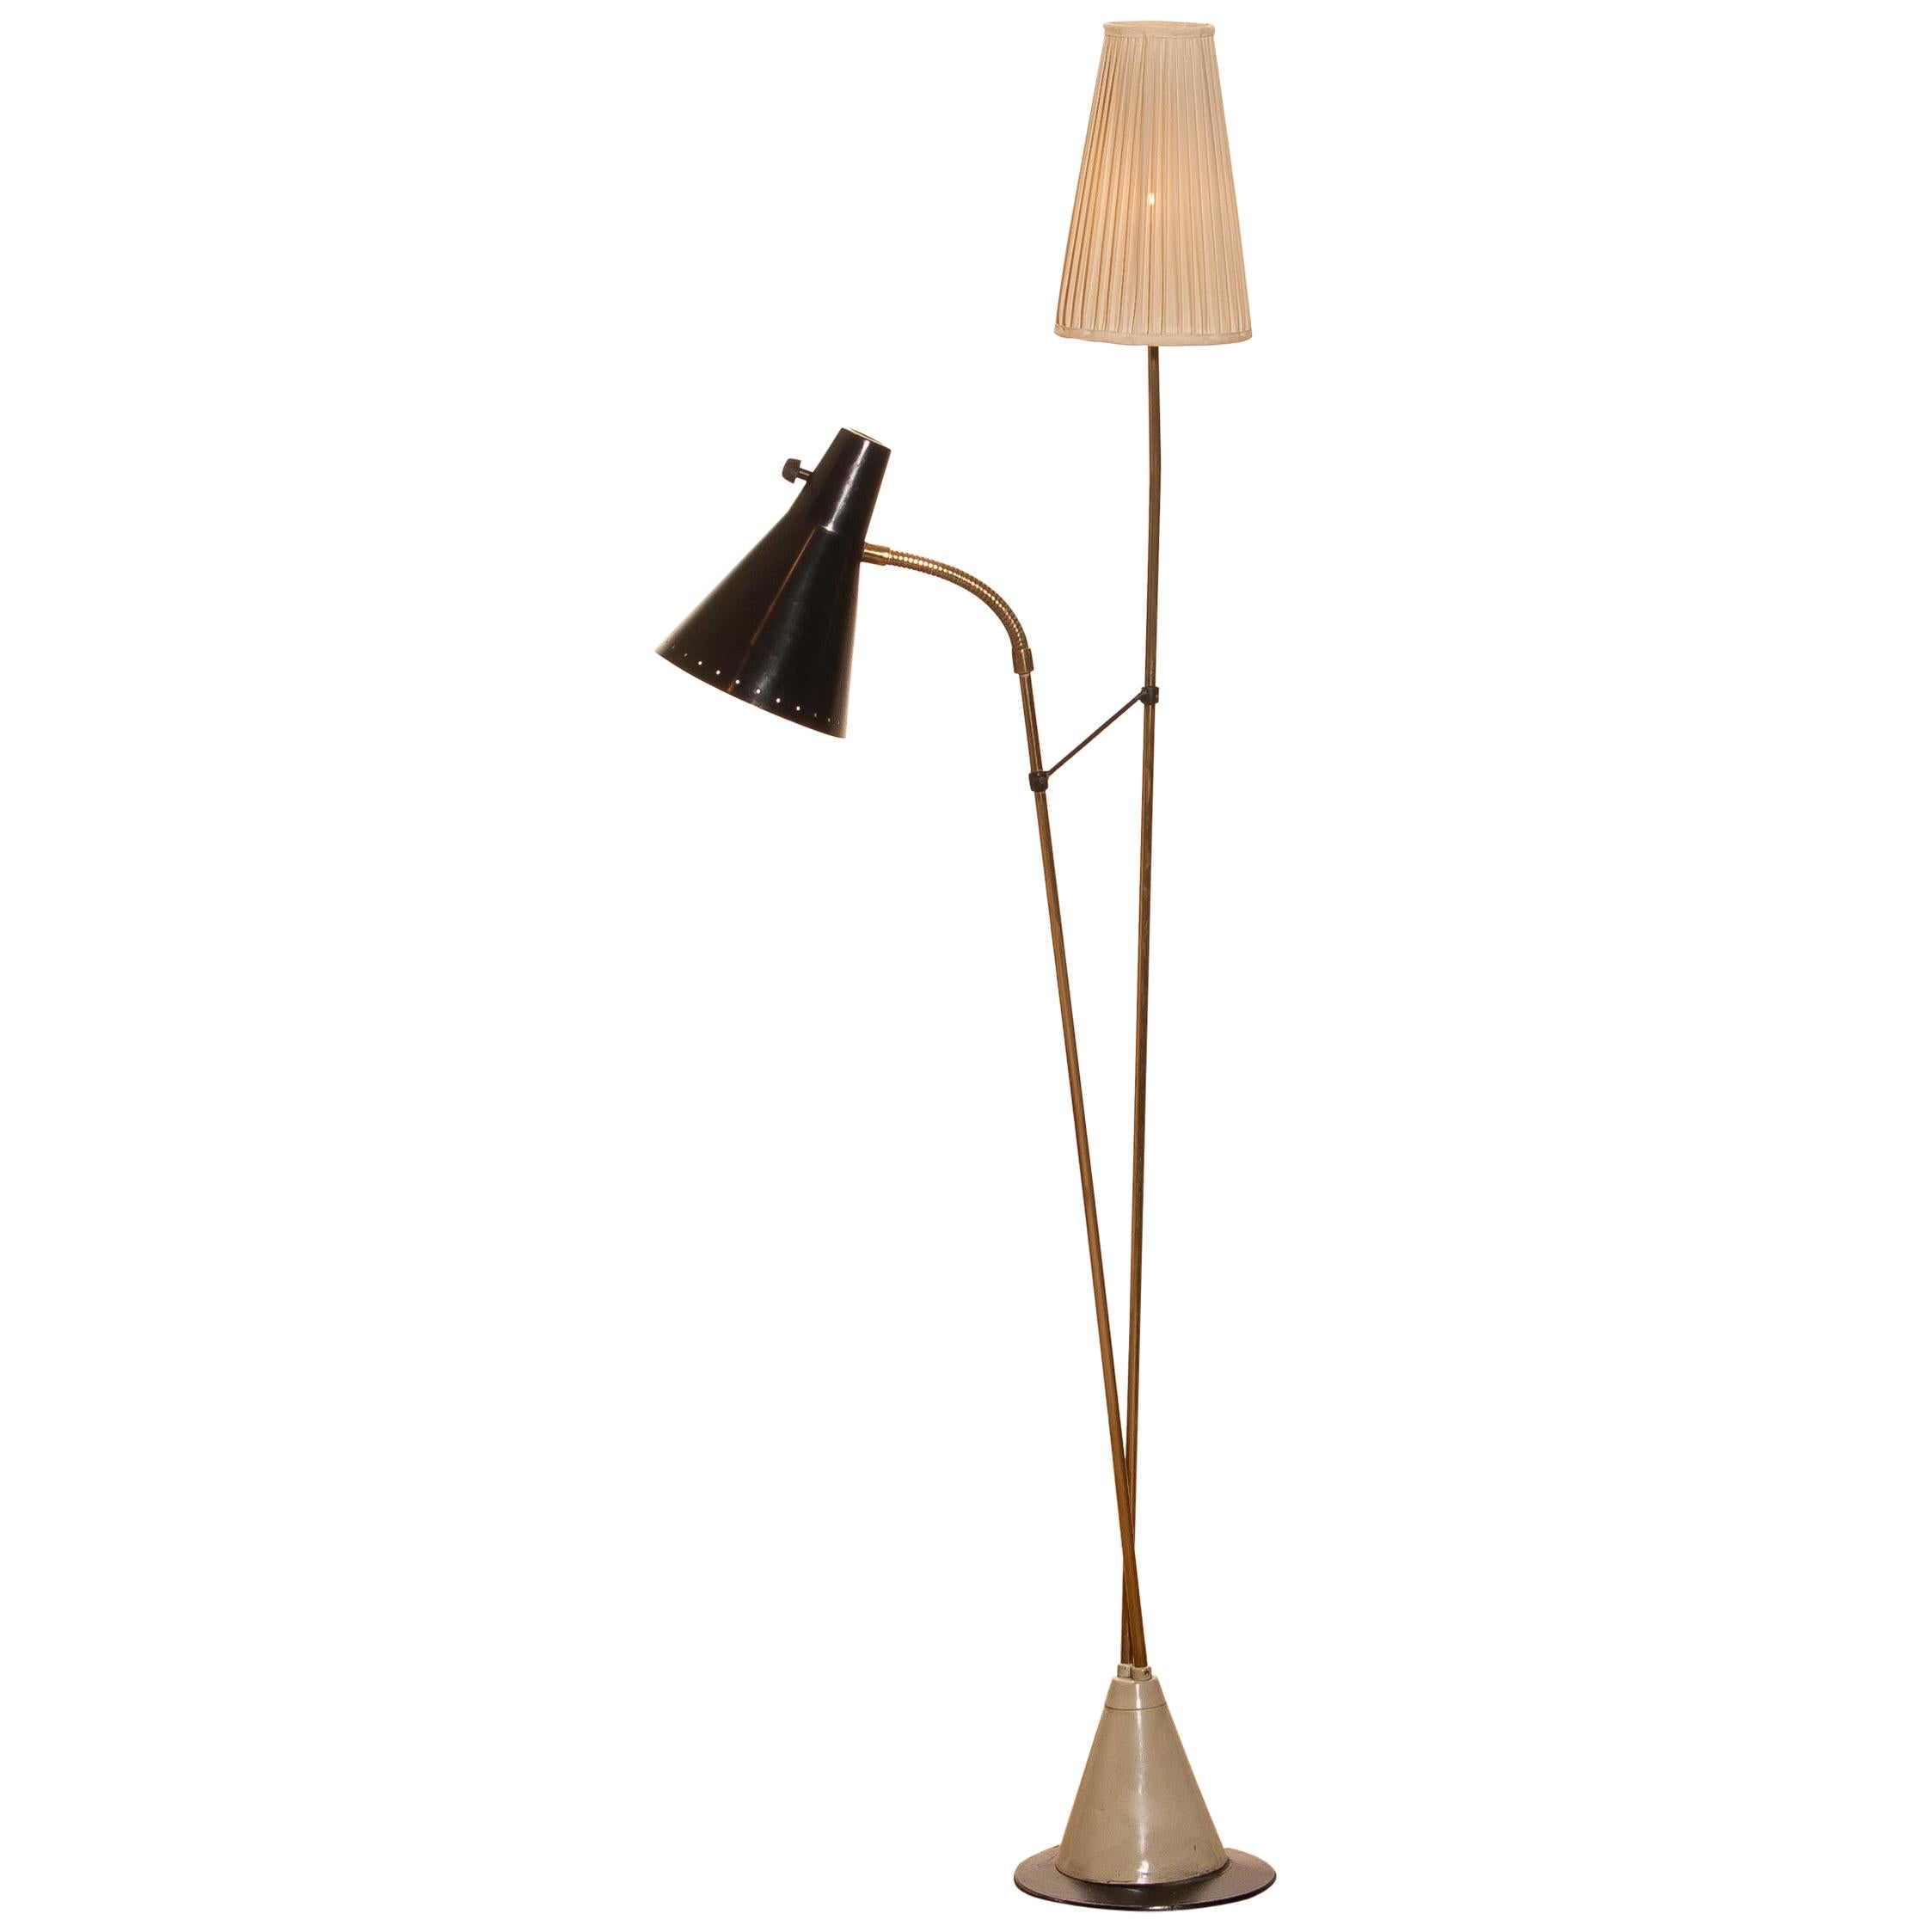 Beautiful floor lamp designed by Hans Bergström for Ateljé Lyktan, Sweden.
This lamp consists of two different shades, one black lacquered metal and one off-white in fabric. The stand is made of brass with a beautiful iron foot. It is in a very